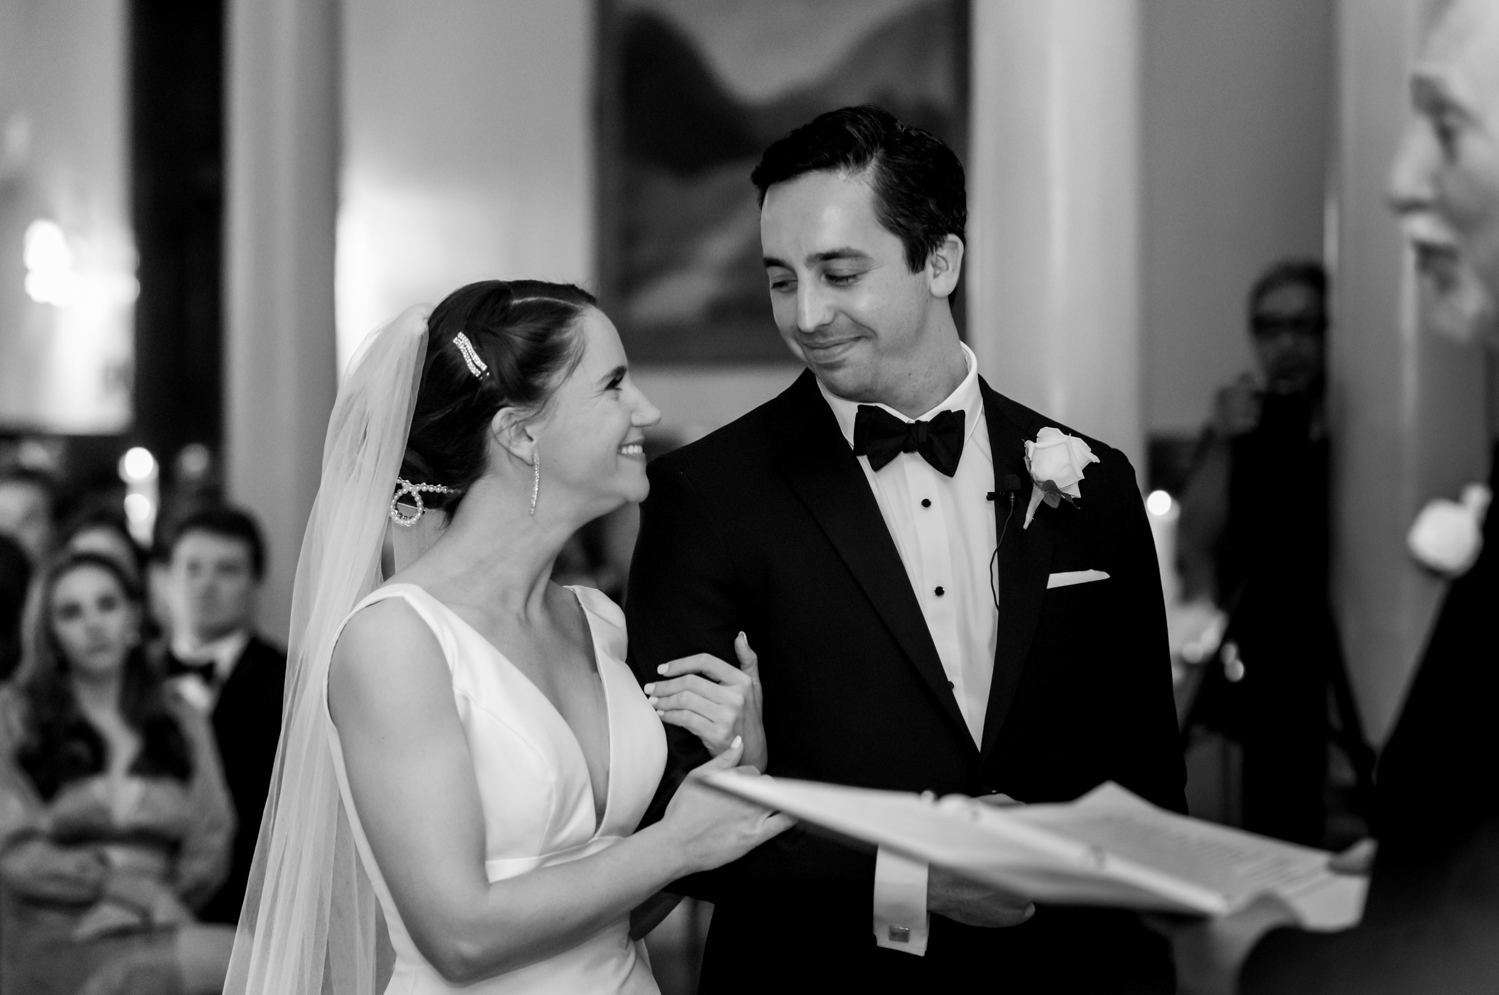 The bride holds the grooms arm and they smile at each other, standing at the altar